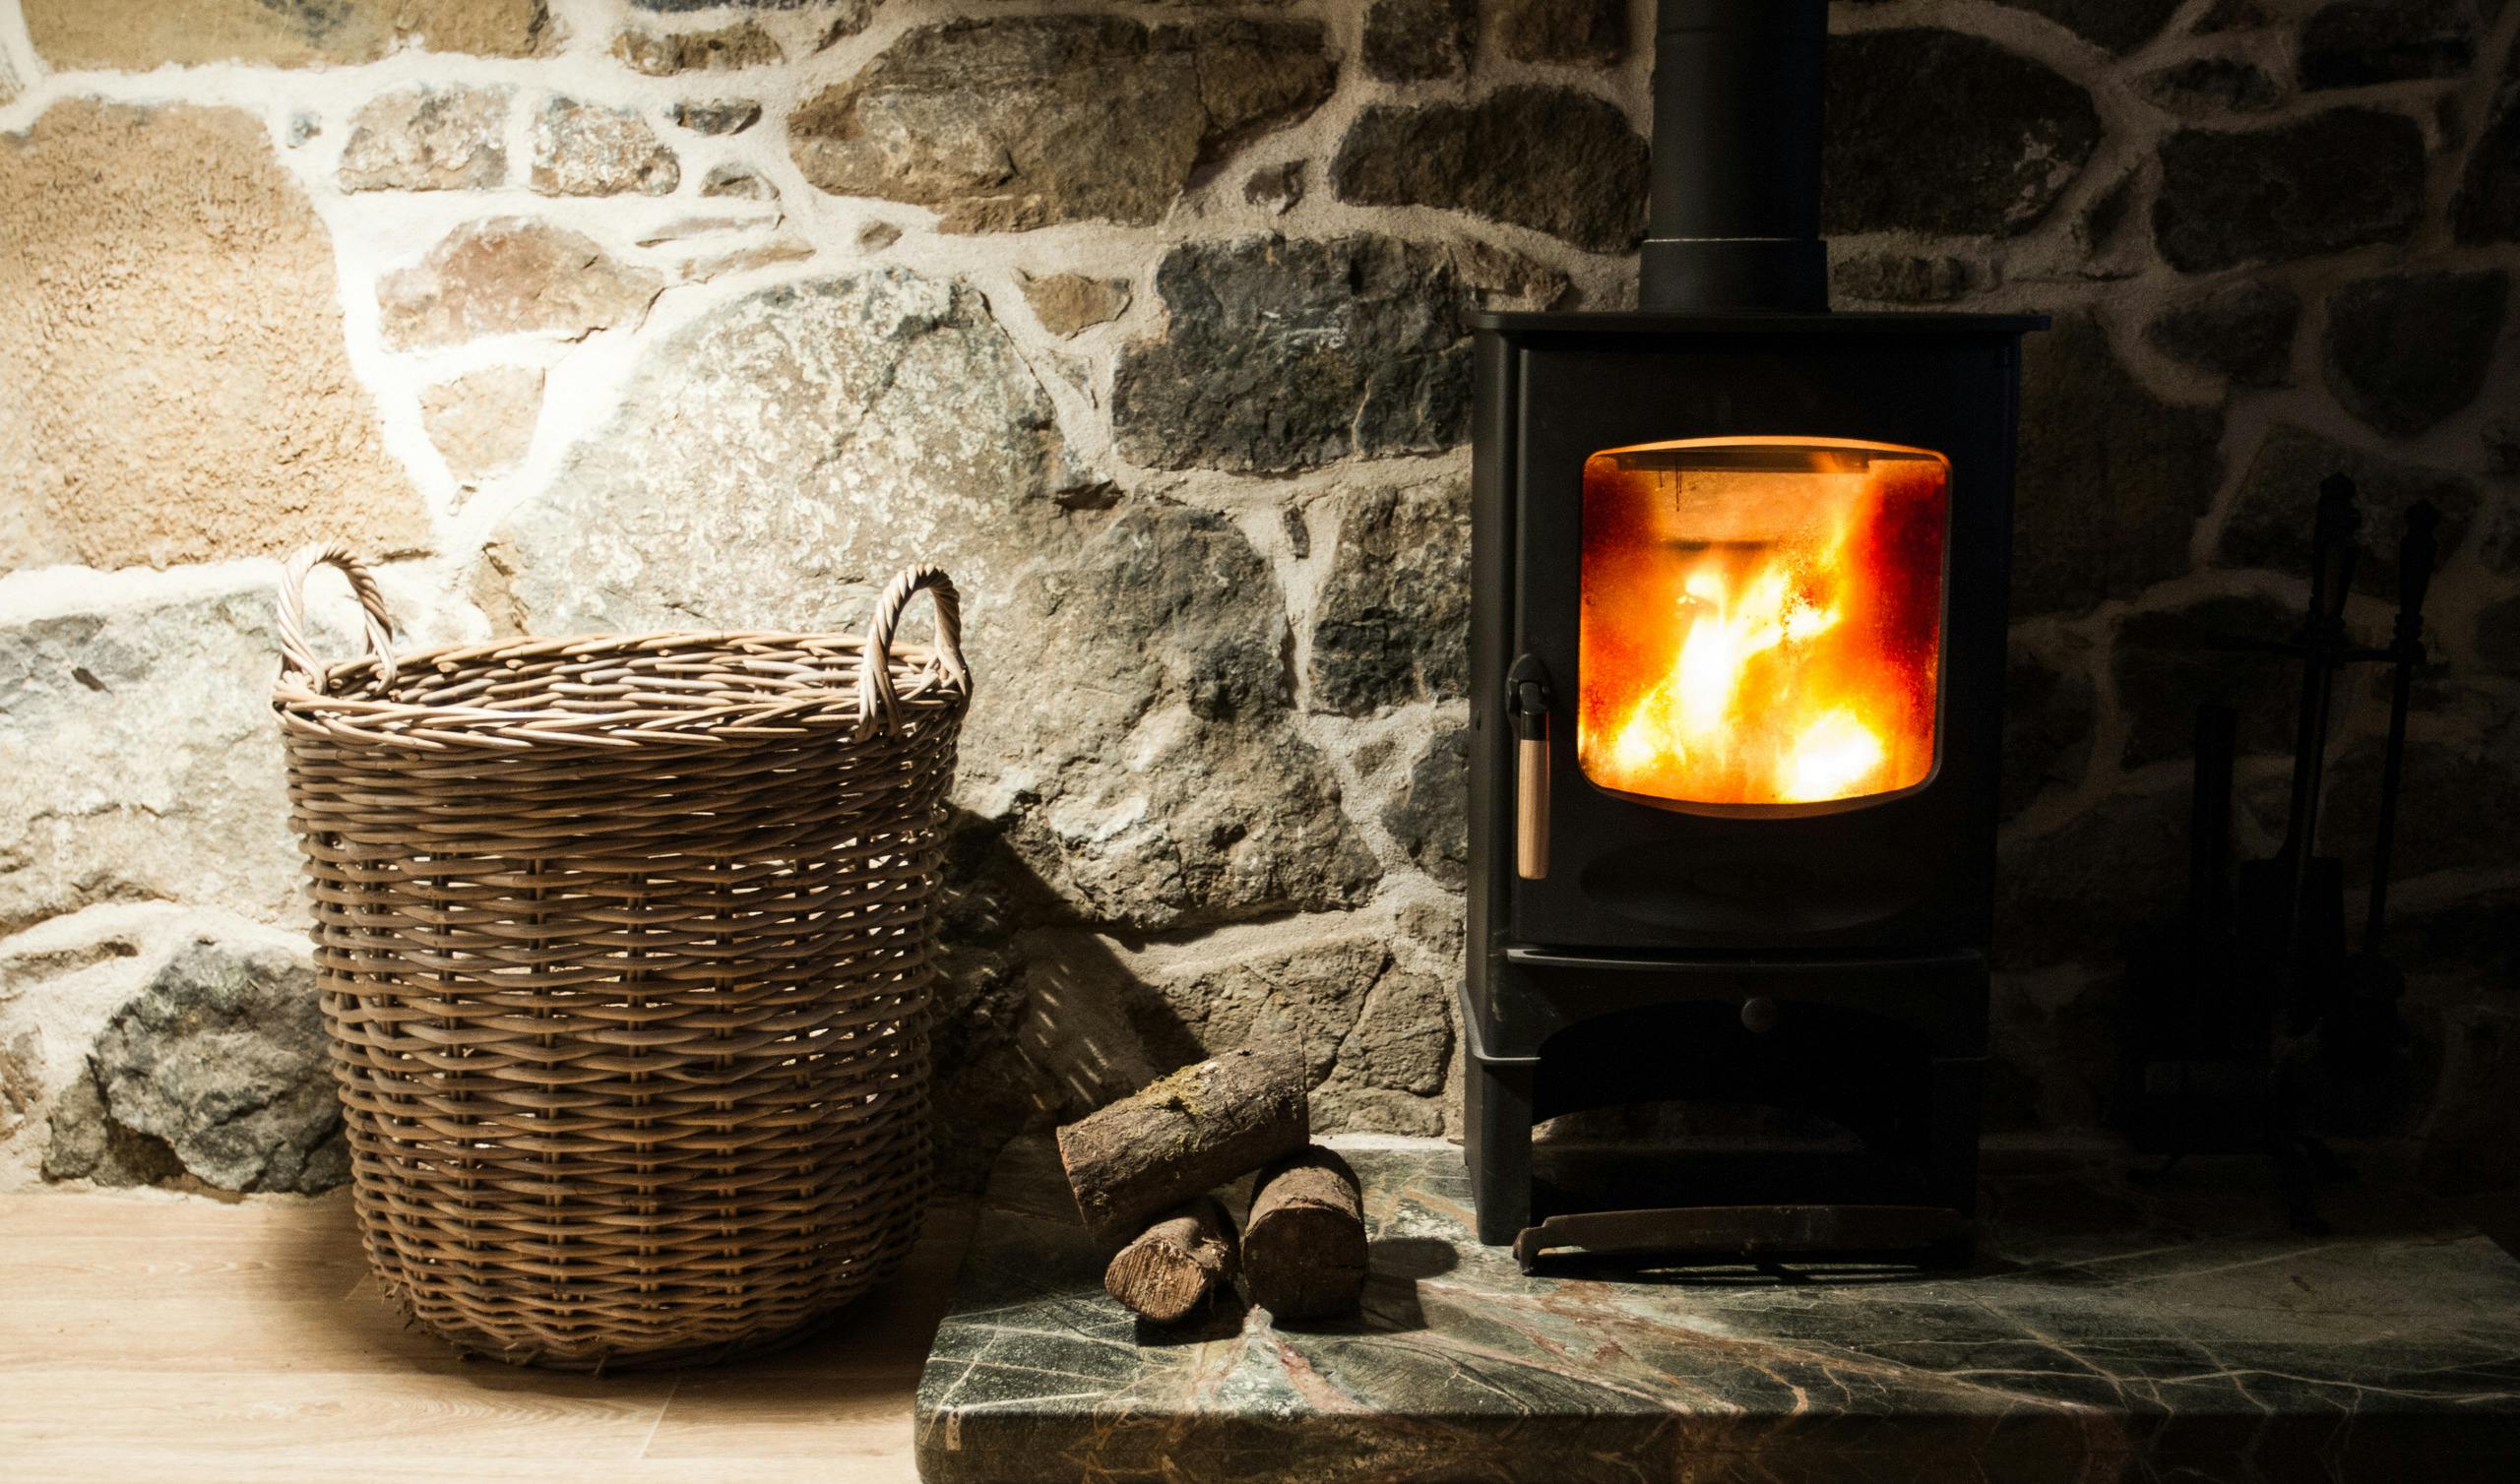 A wood burner drive and fireplace inside an old. stone cottage with logs and wicker storage basket.